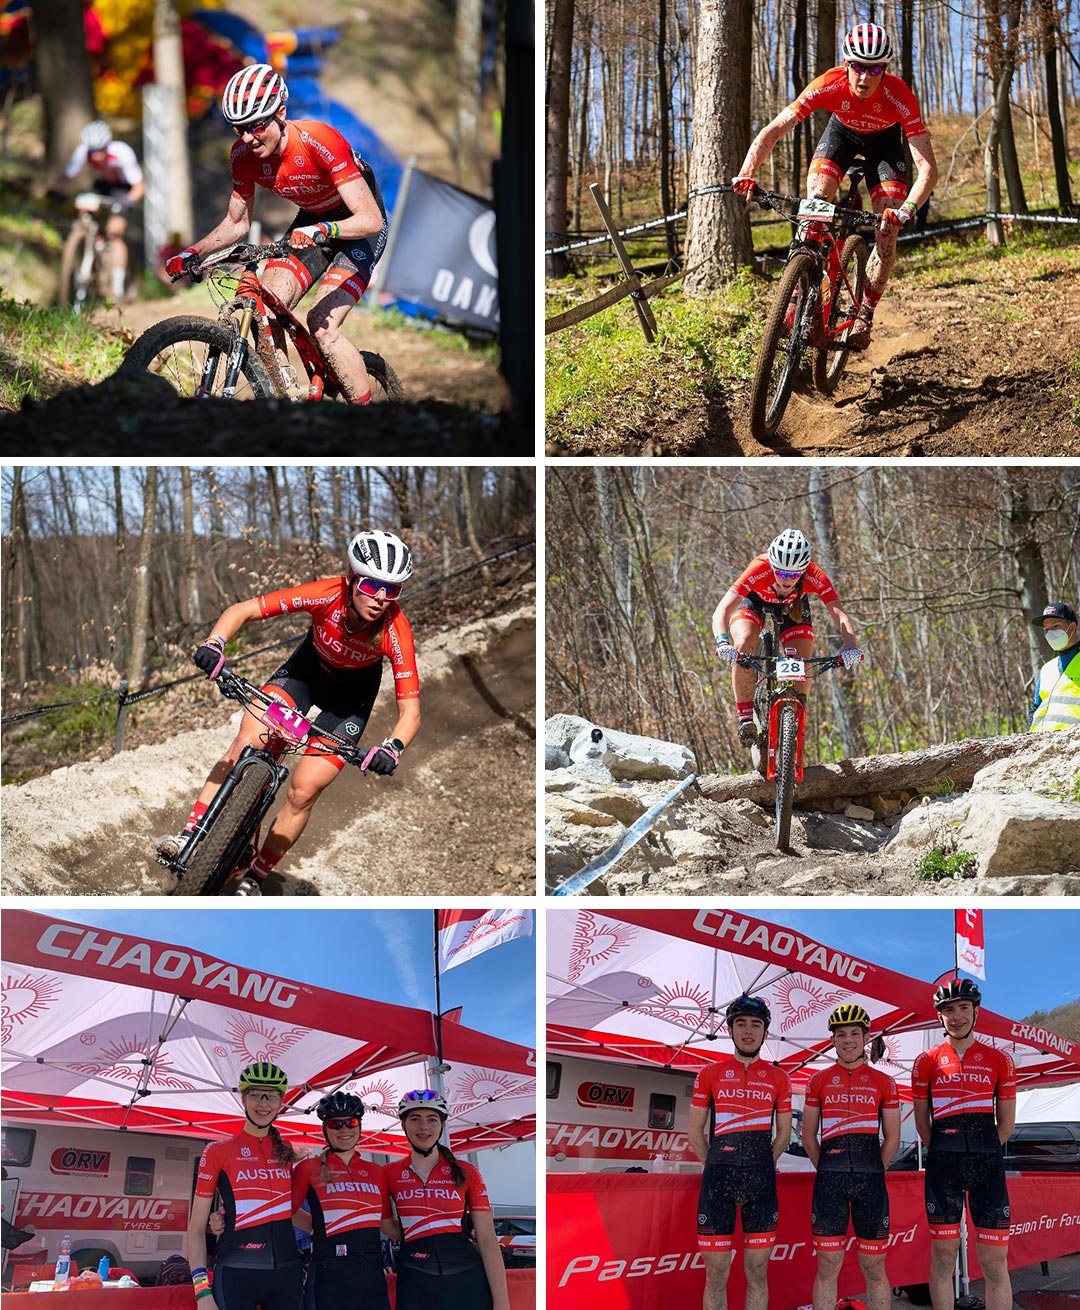 The Austrian National Team at the World Cup in Albstadt